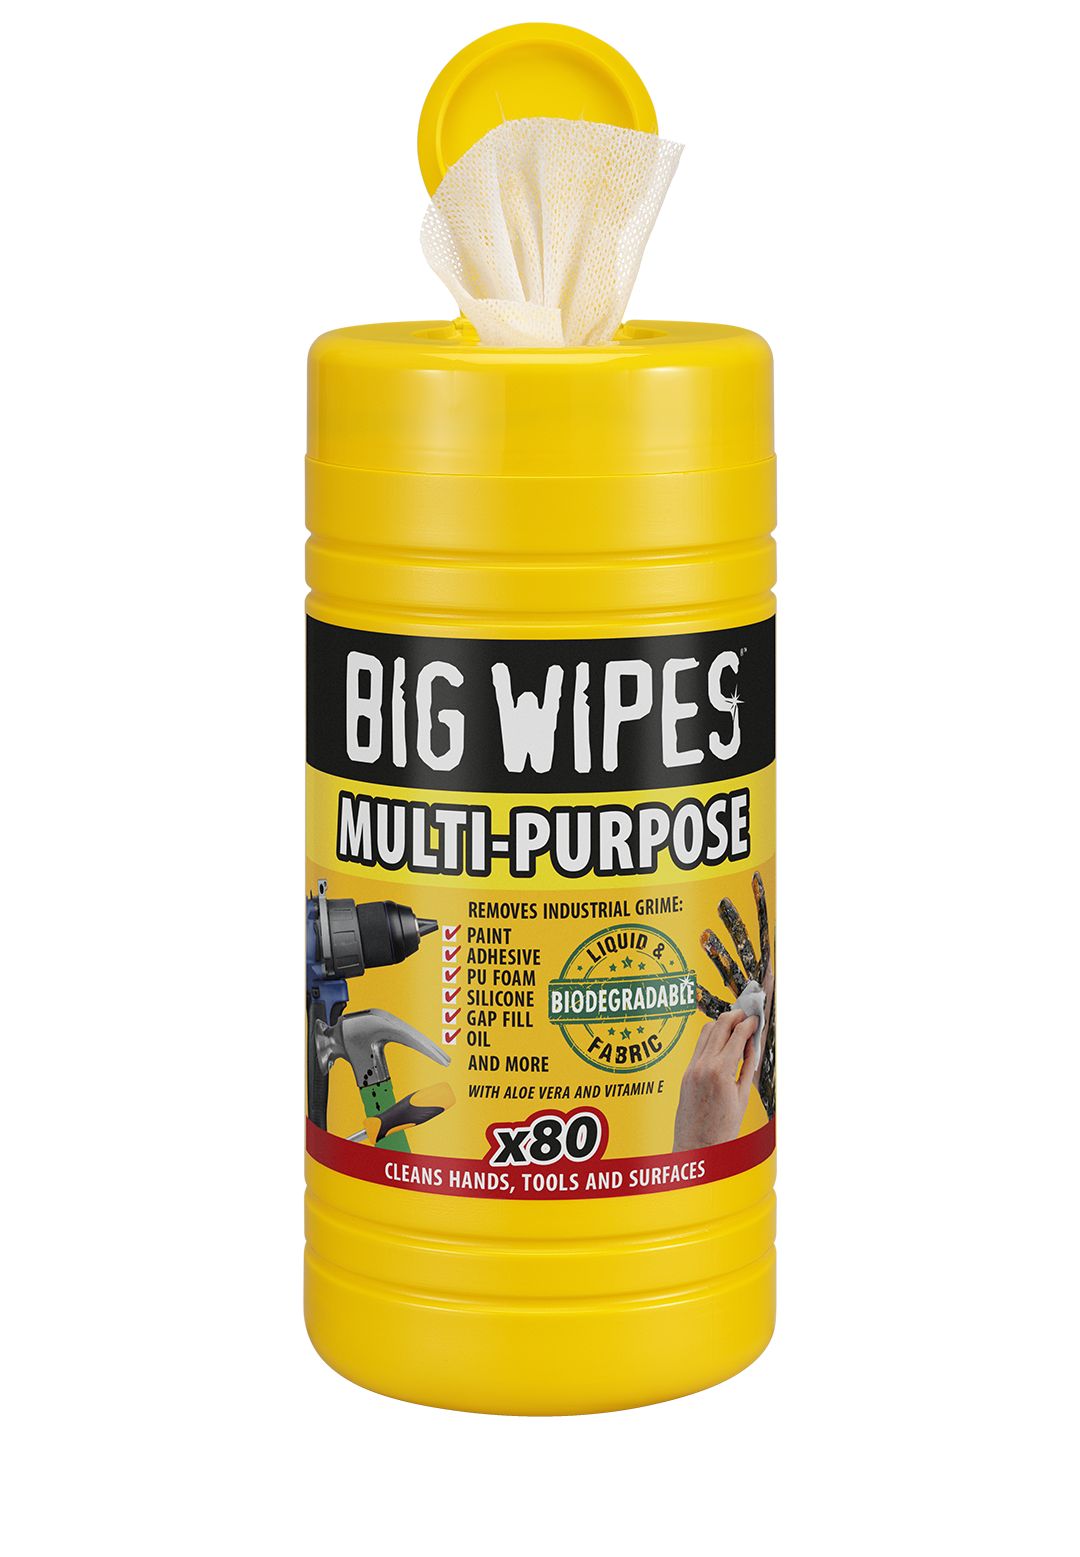 https://media.diy.com/is/image/Kingfisher/big-wipes-unscented-cleaning-wipes-pack-of-80~5060065660644_02c_bq?$MOB_PREV$&$width=618&$height=618